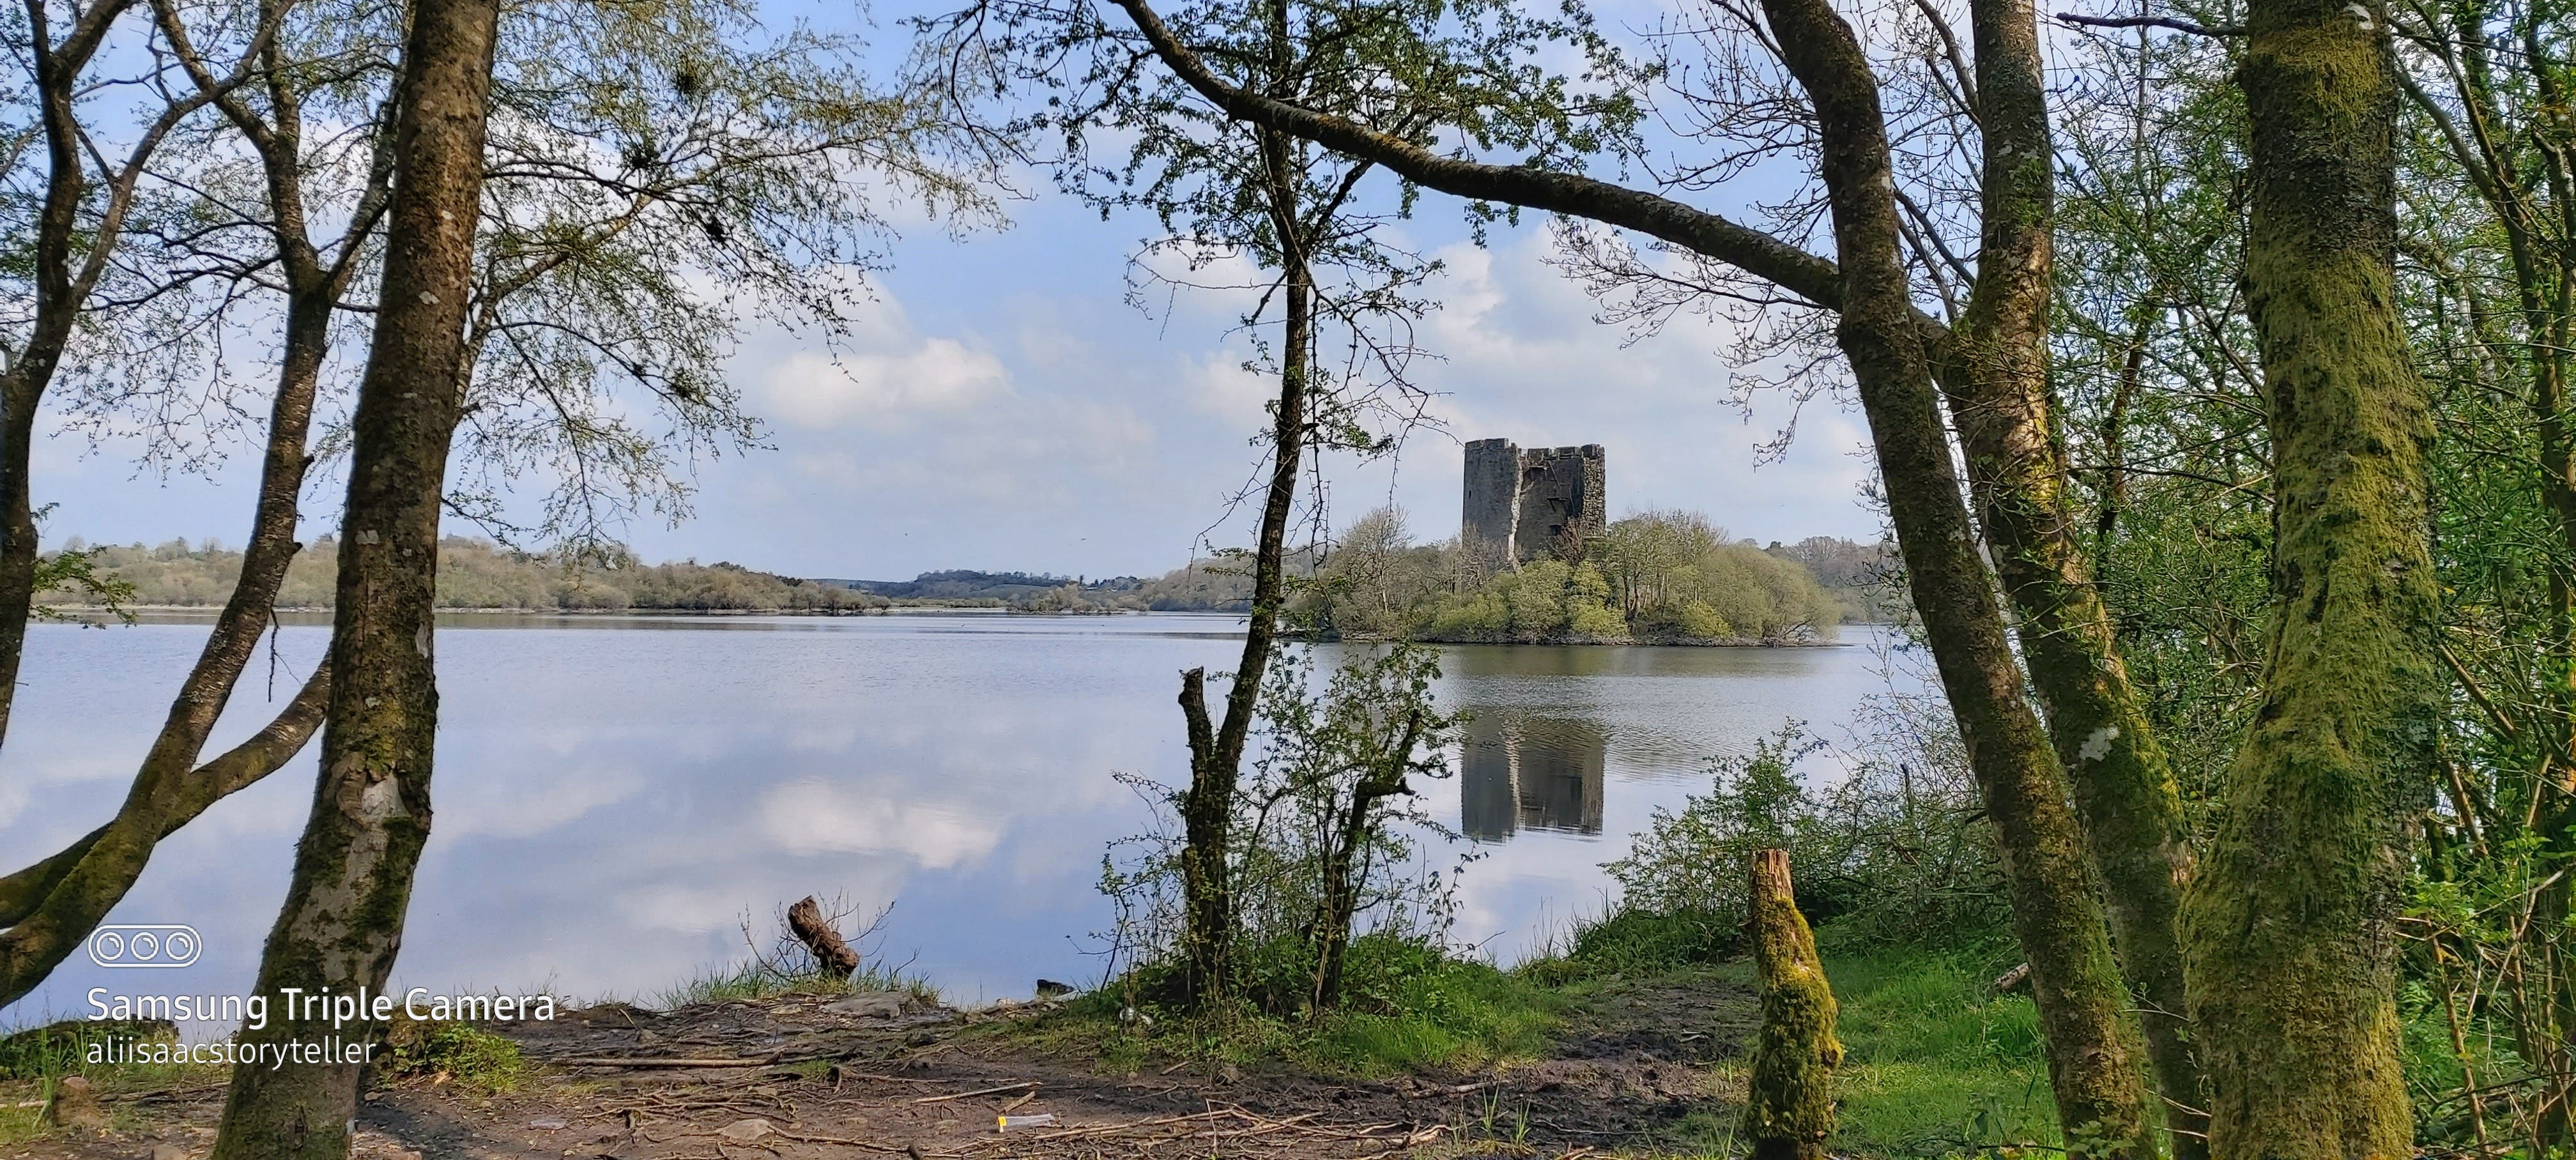 A stine tower-house style castle surrounded by bushes and trees at its base is glimpsed through the trees and branches of Killykeen forest, the sky is pale blue and puffs of cotton wool clouds glide through it, reflected in a mirror-like lake surface. The trees and bushes are greened with new spring growth.